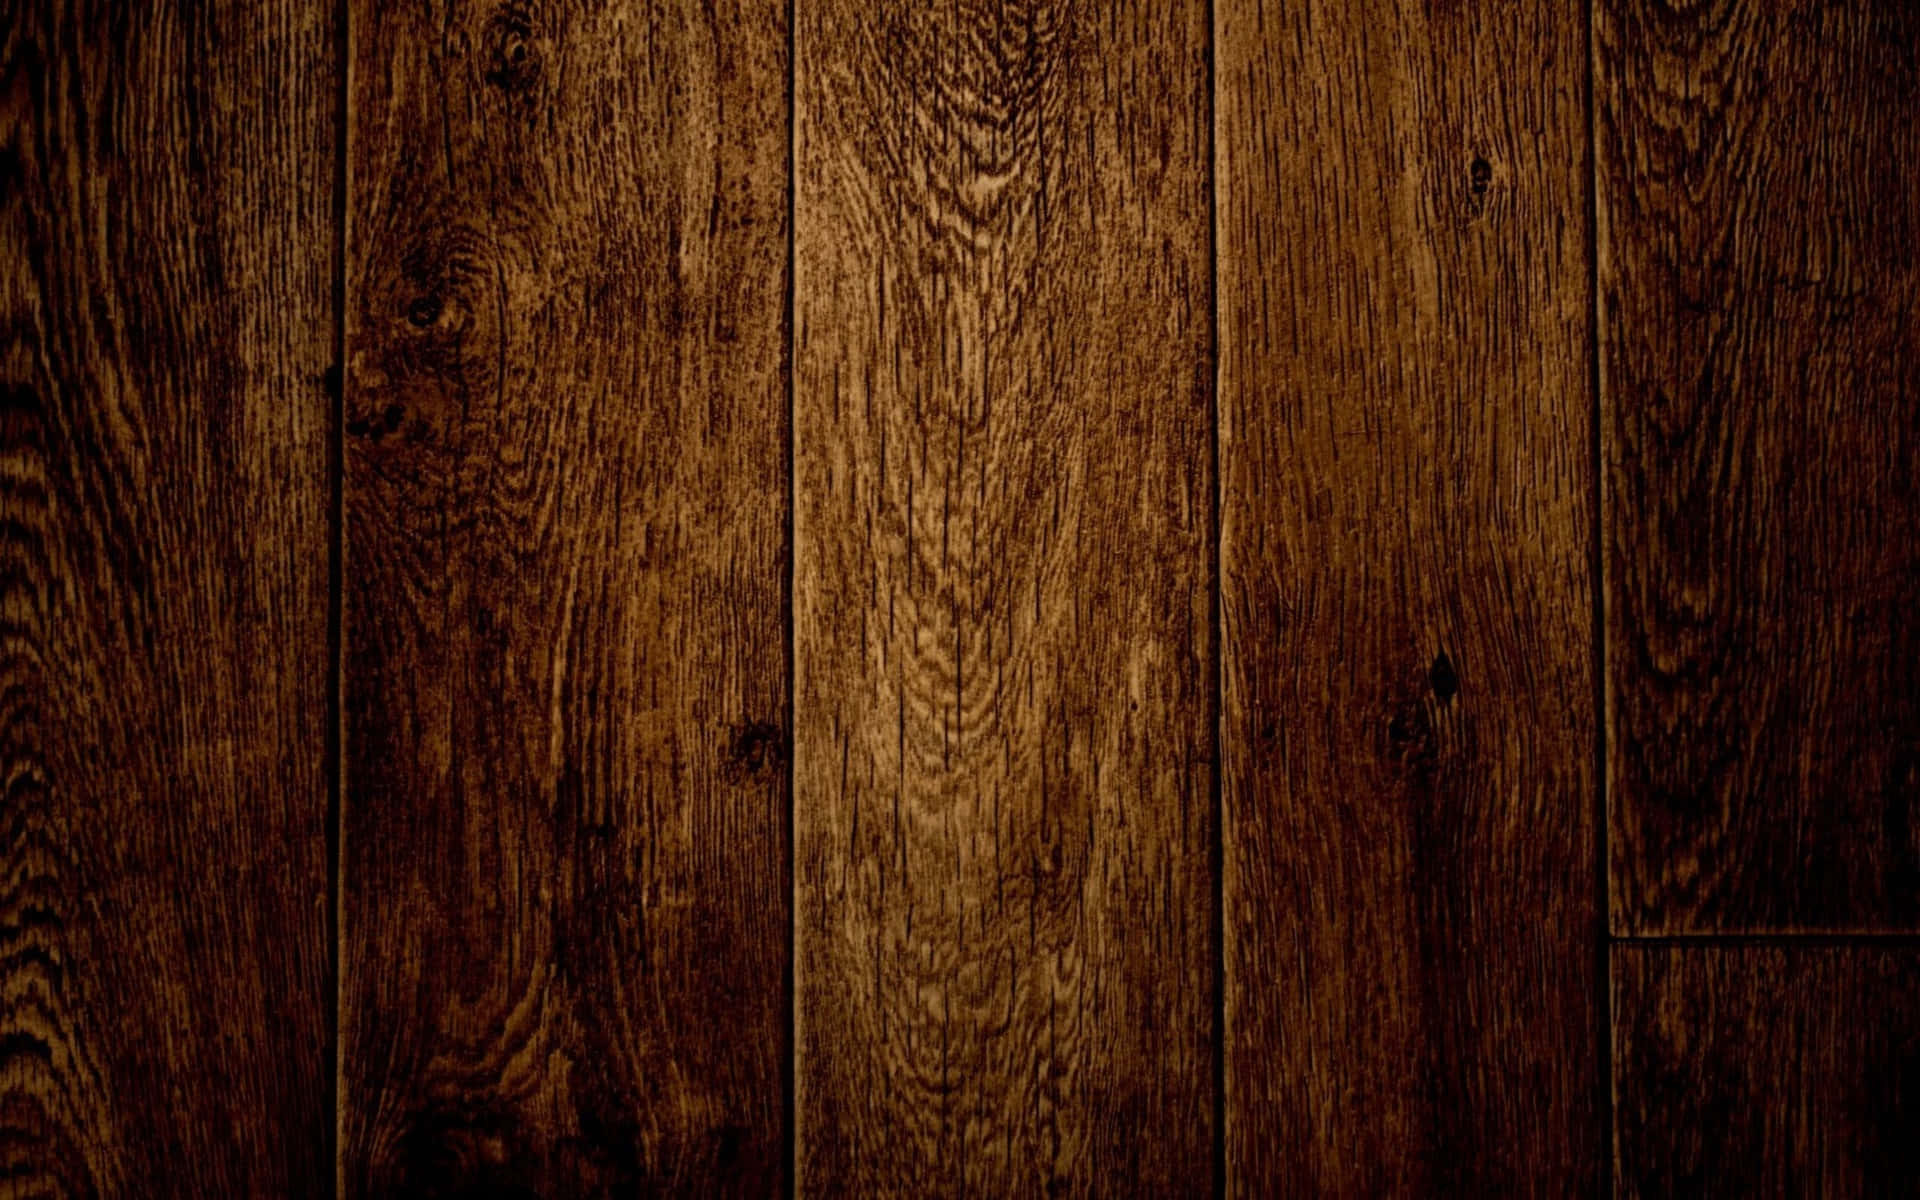 Rustic Appeal: Beautiful Detail of Wooden Planks Background